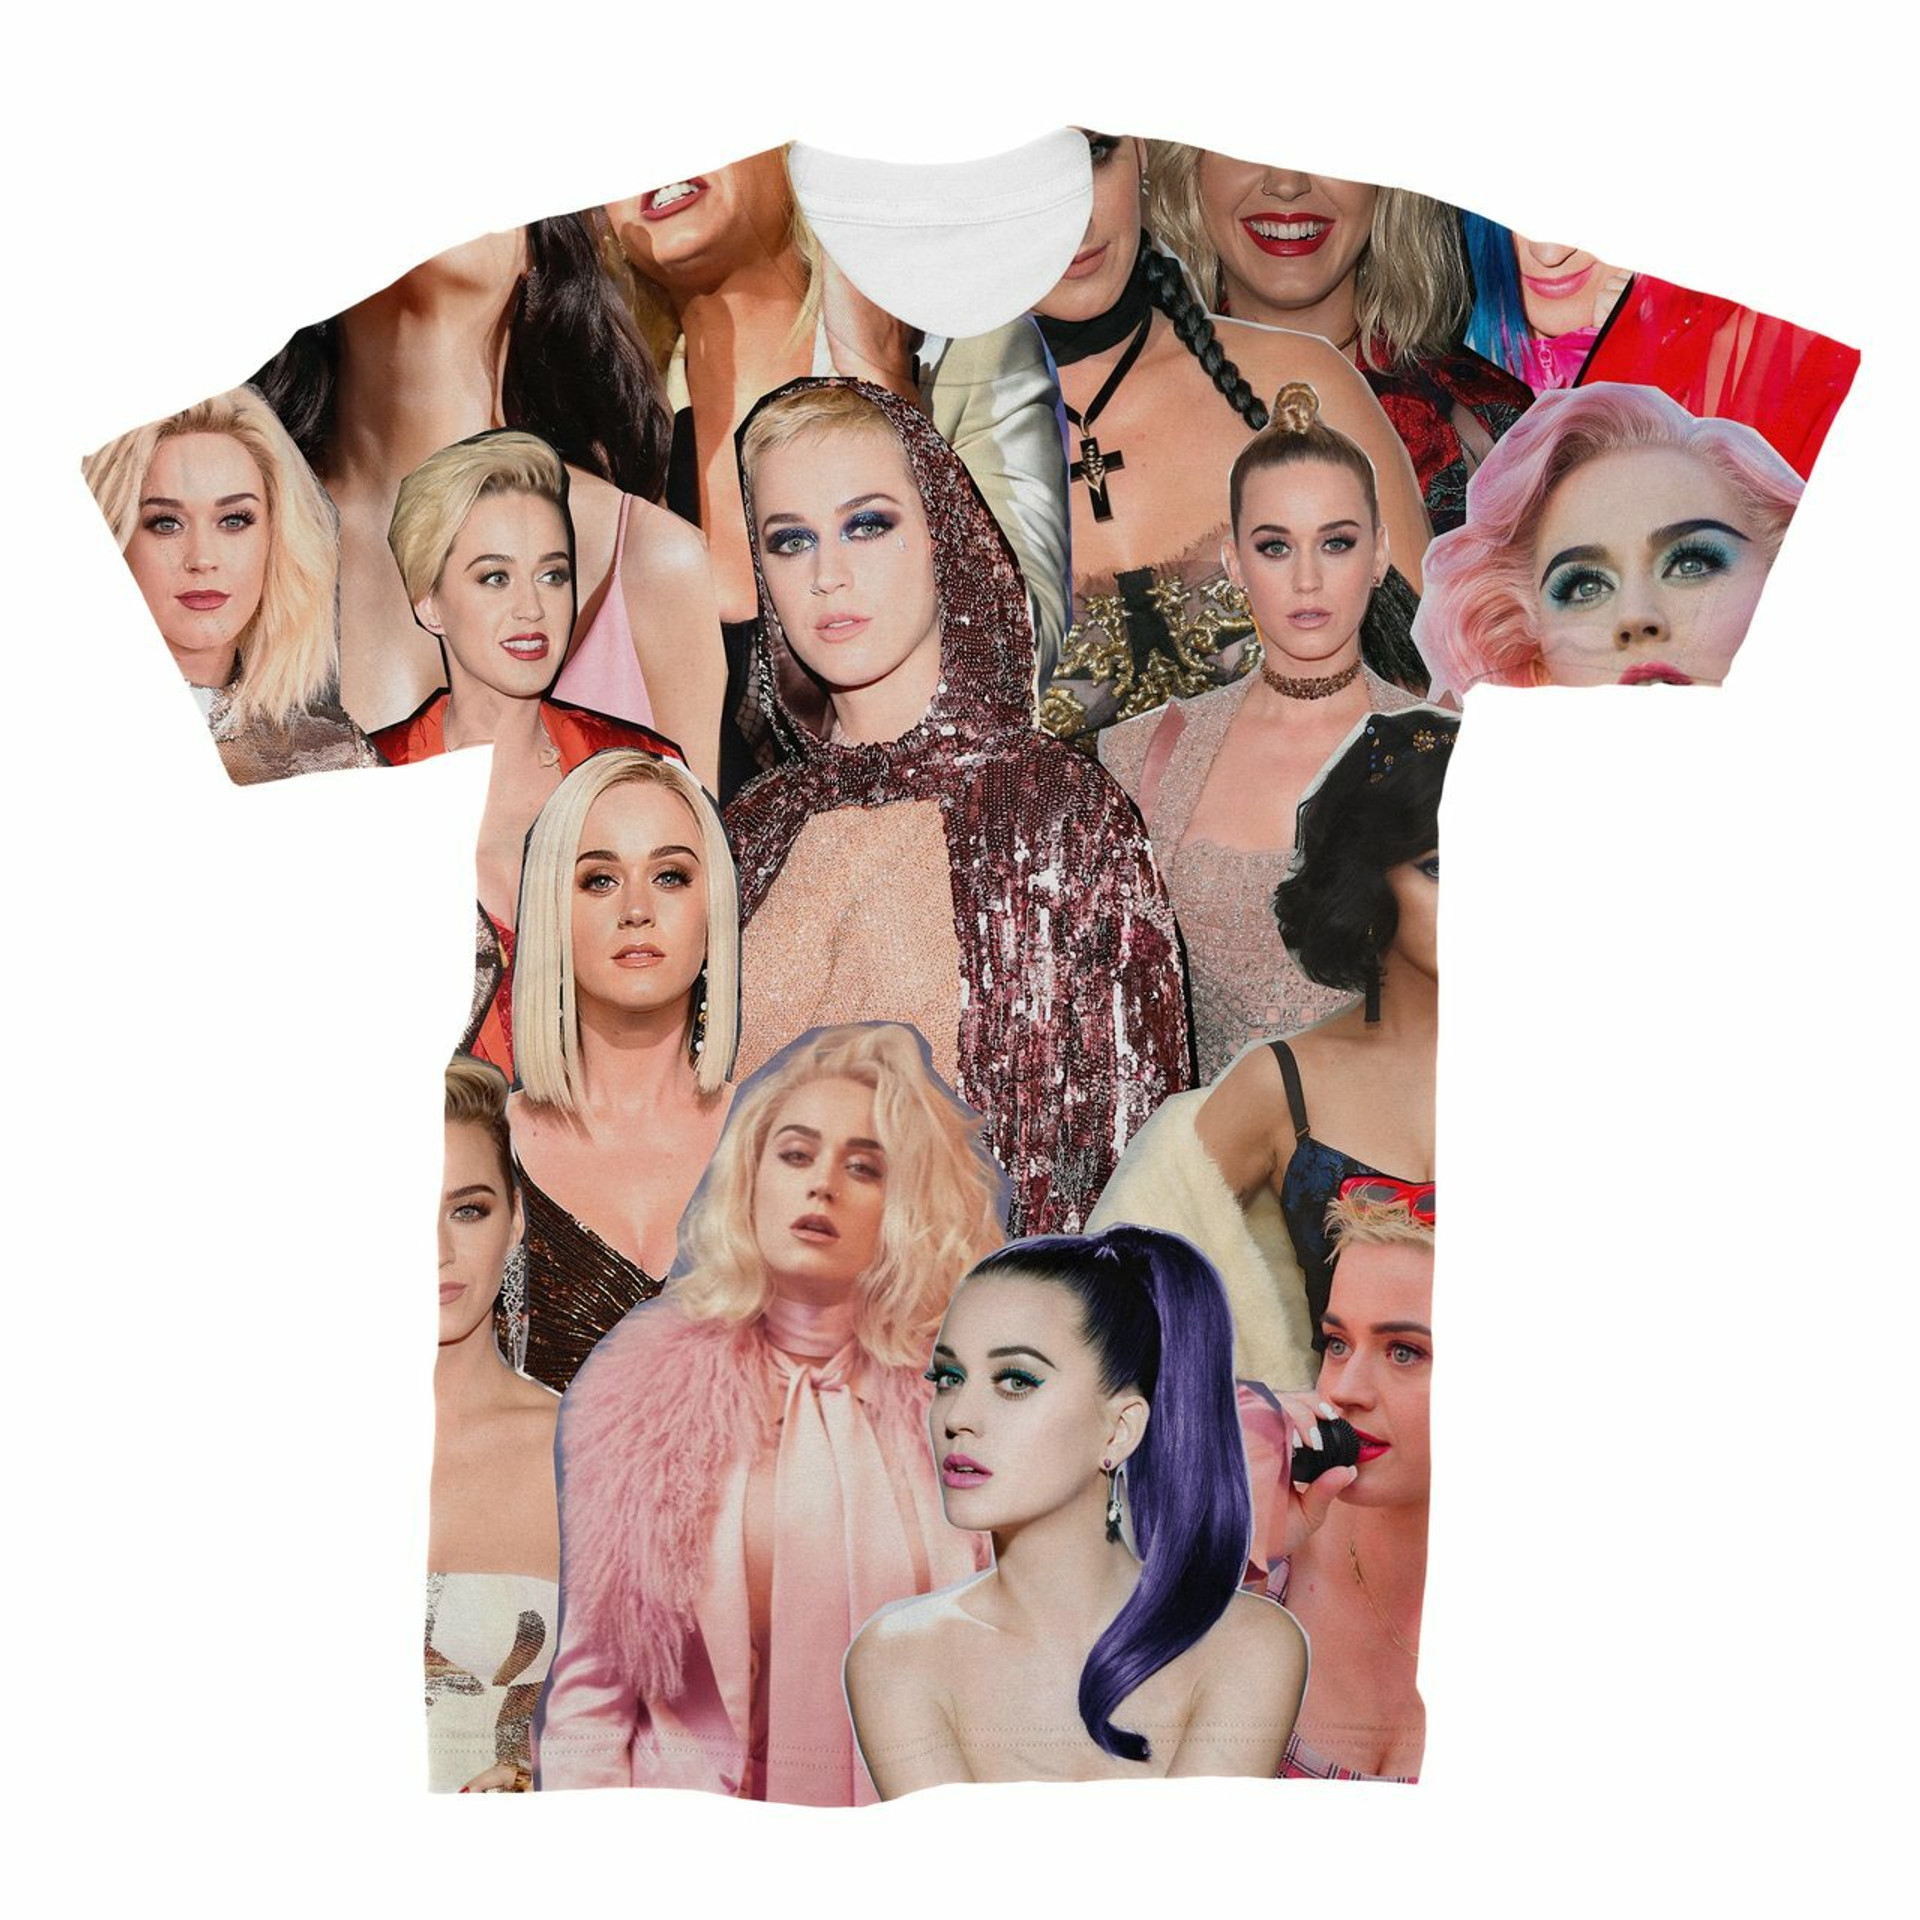 Katy Perry Photo Collage Shirt Subliworks